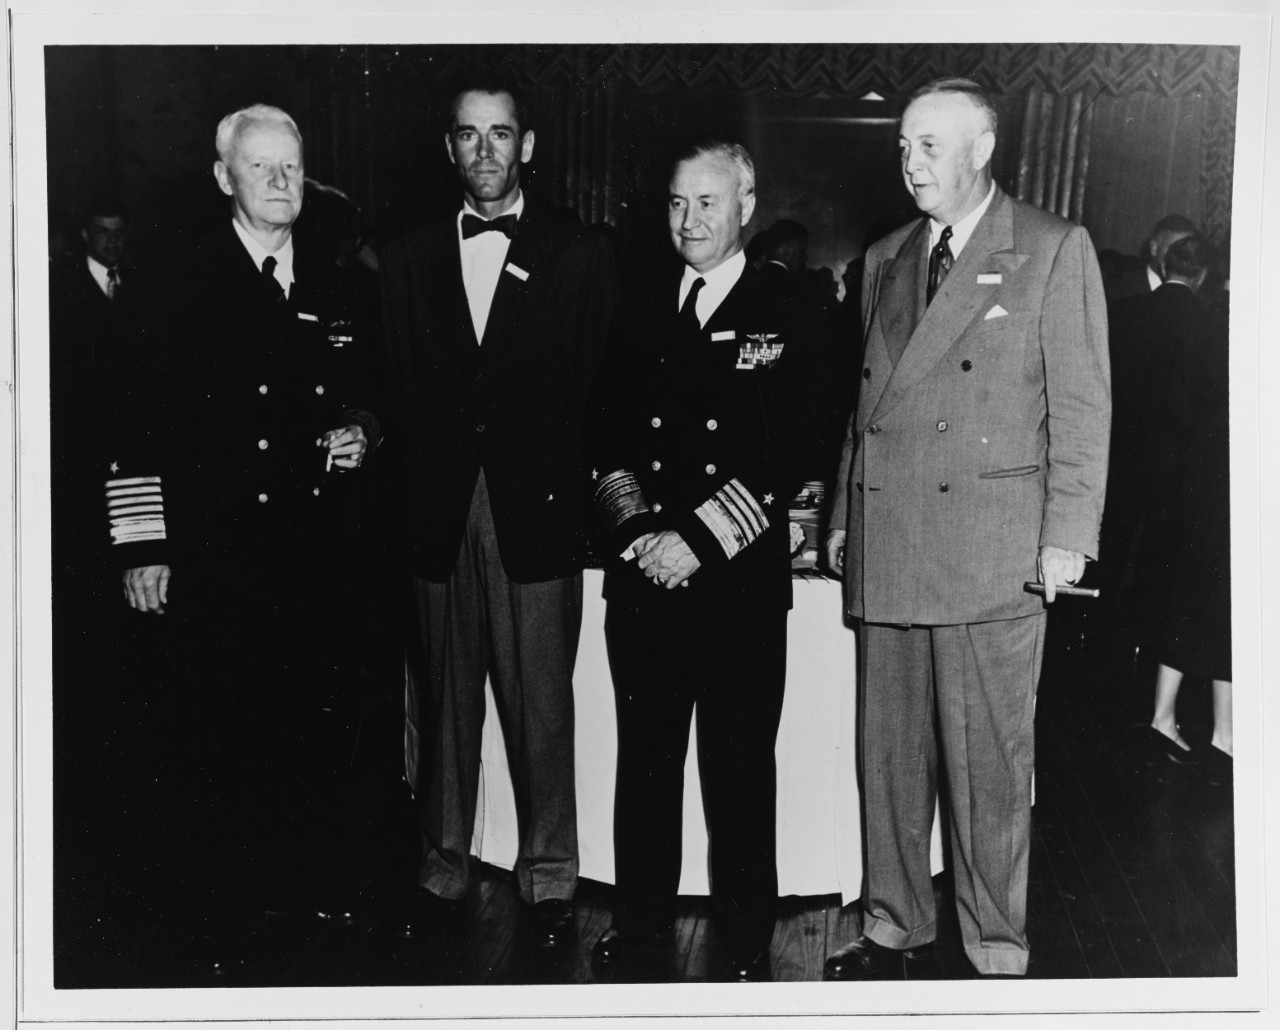 Photo #: NH 62376 "Pearl Harbor Day" Party, 7 December 1949